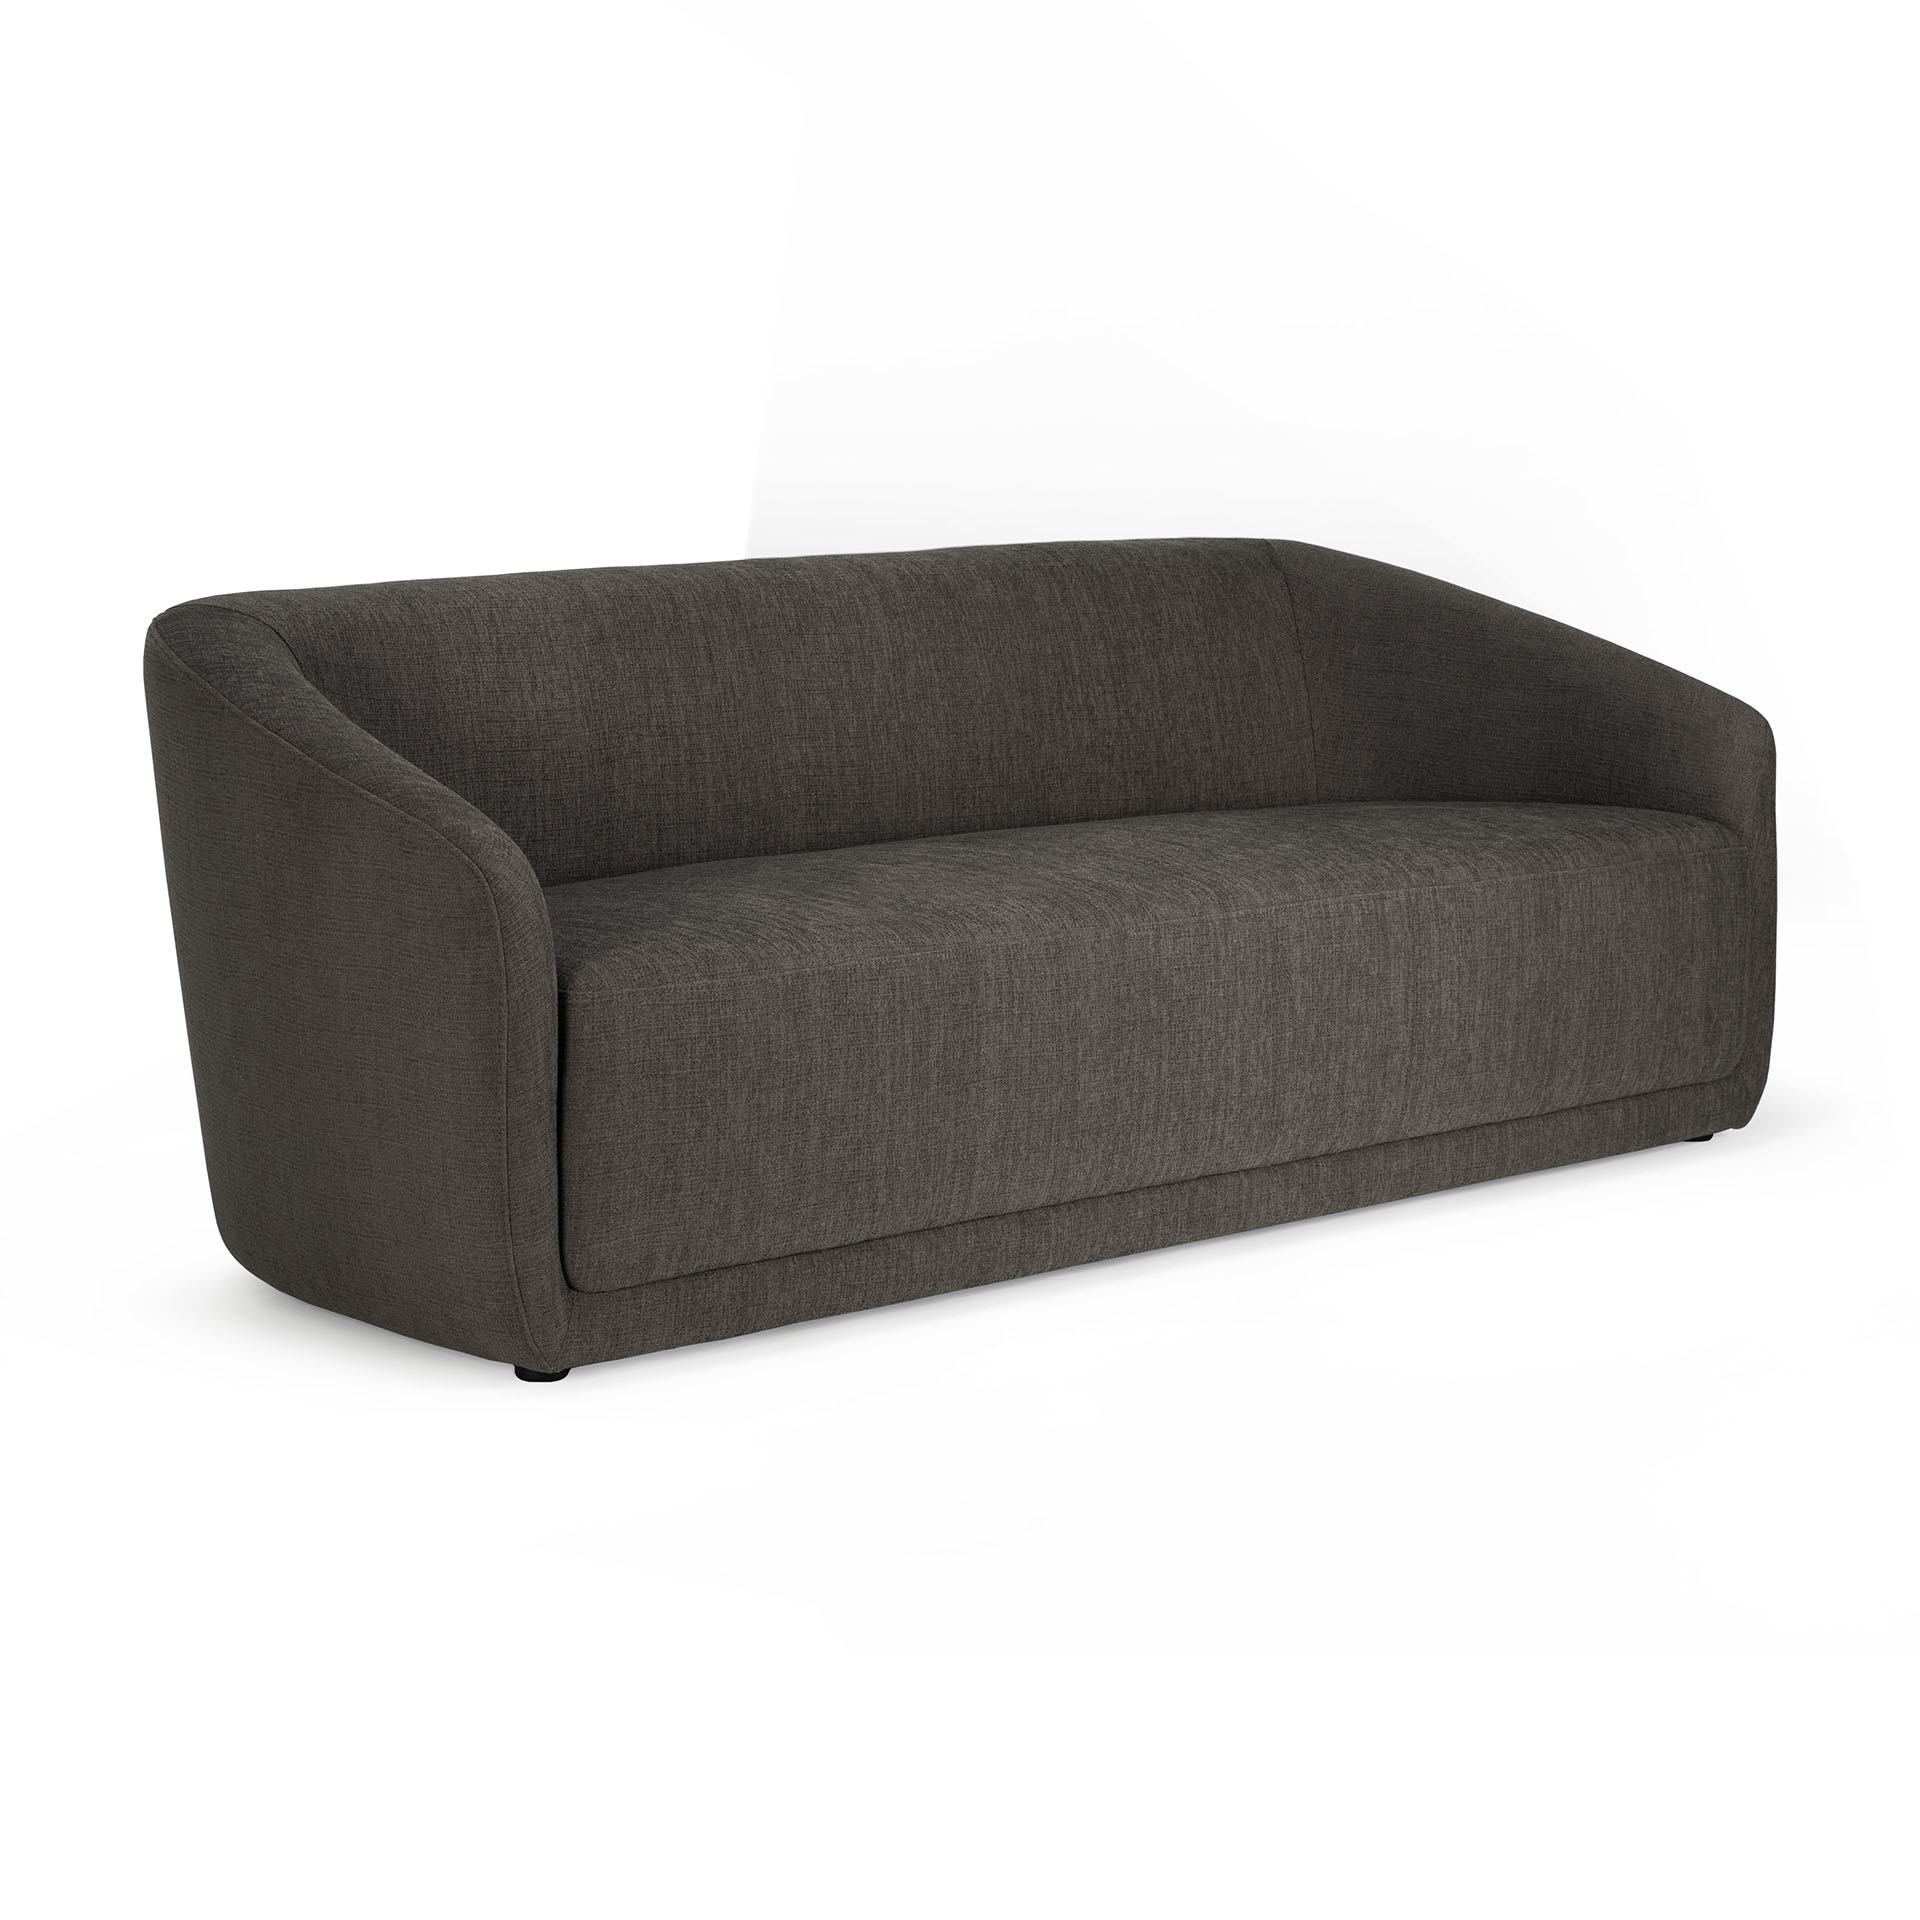 20151_Trapeze sofa_3seater_pepper_without_cushion_side_cut_web